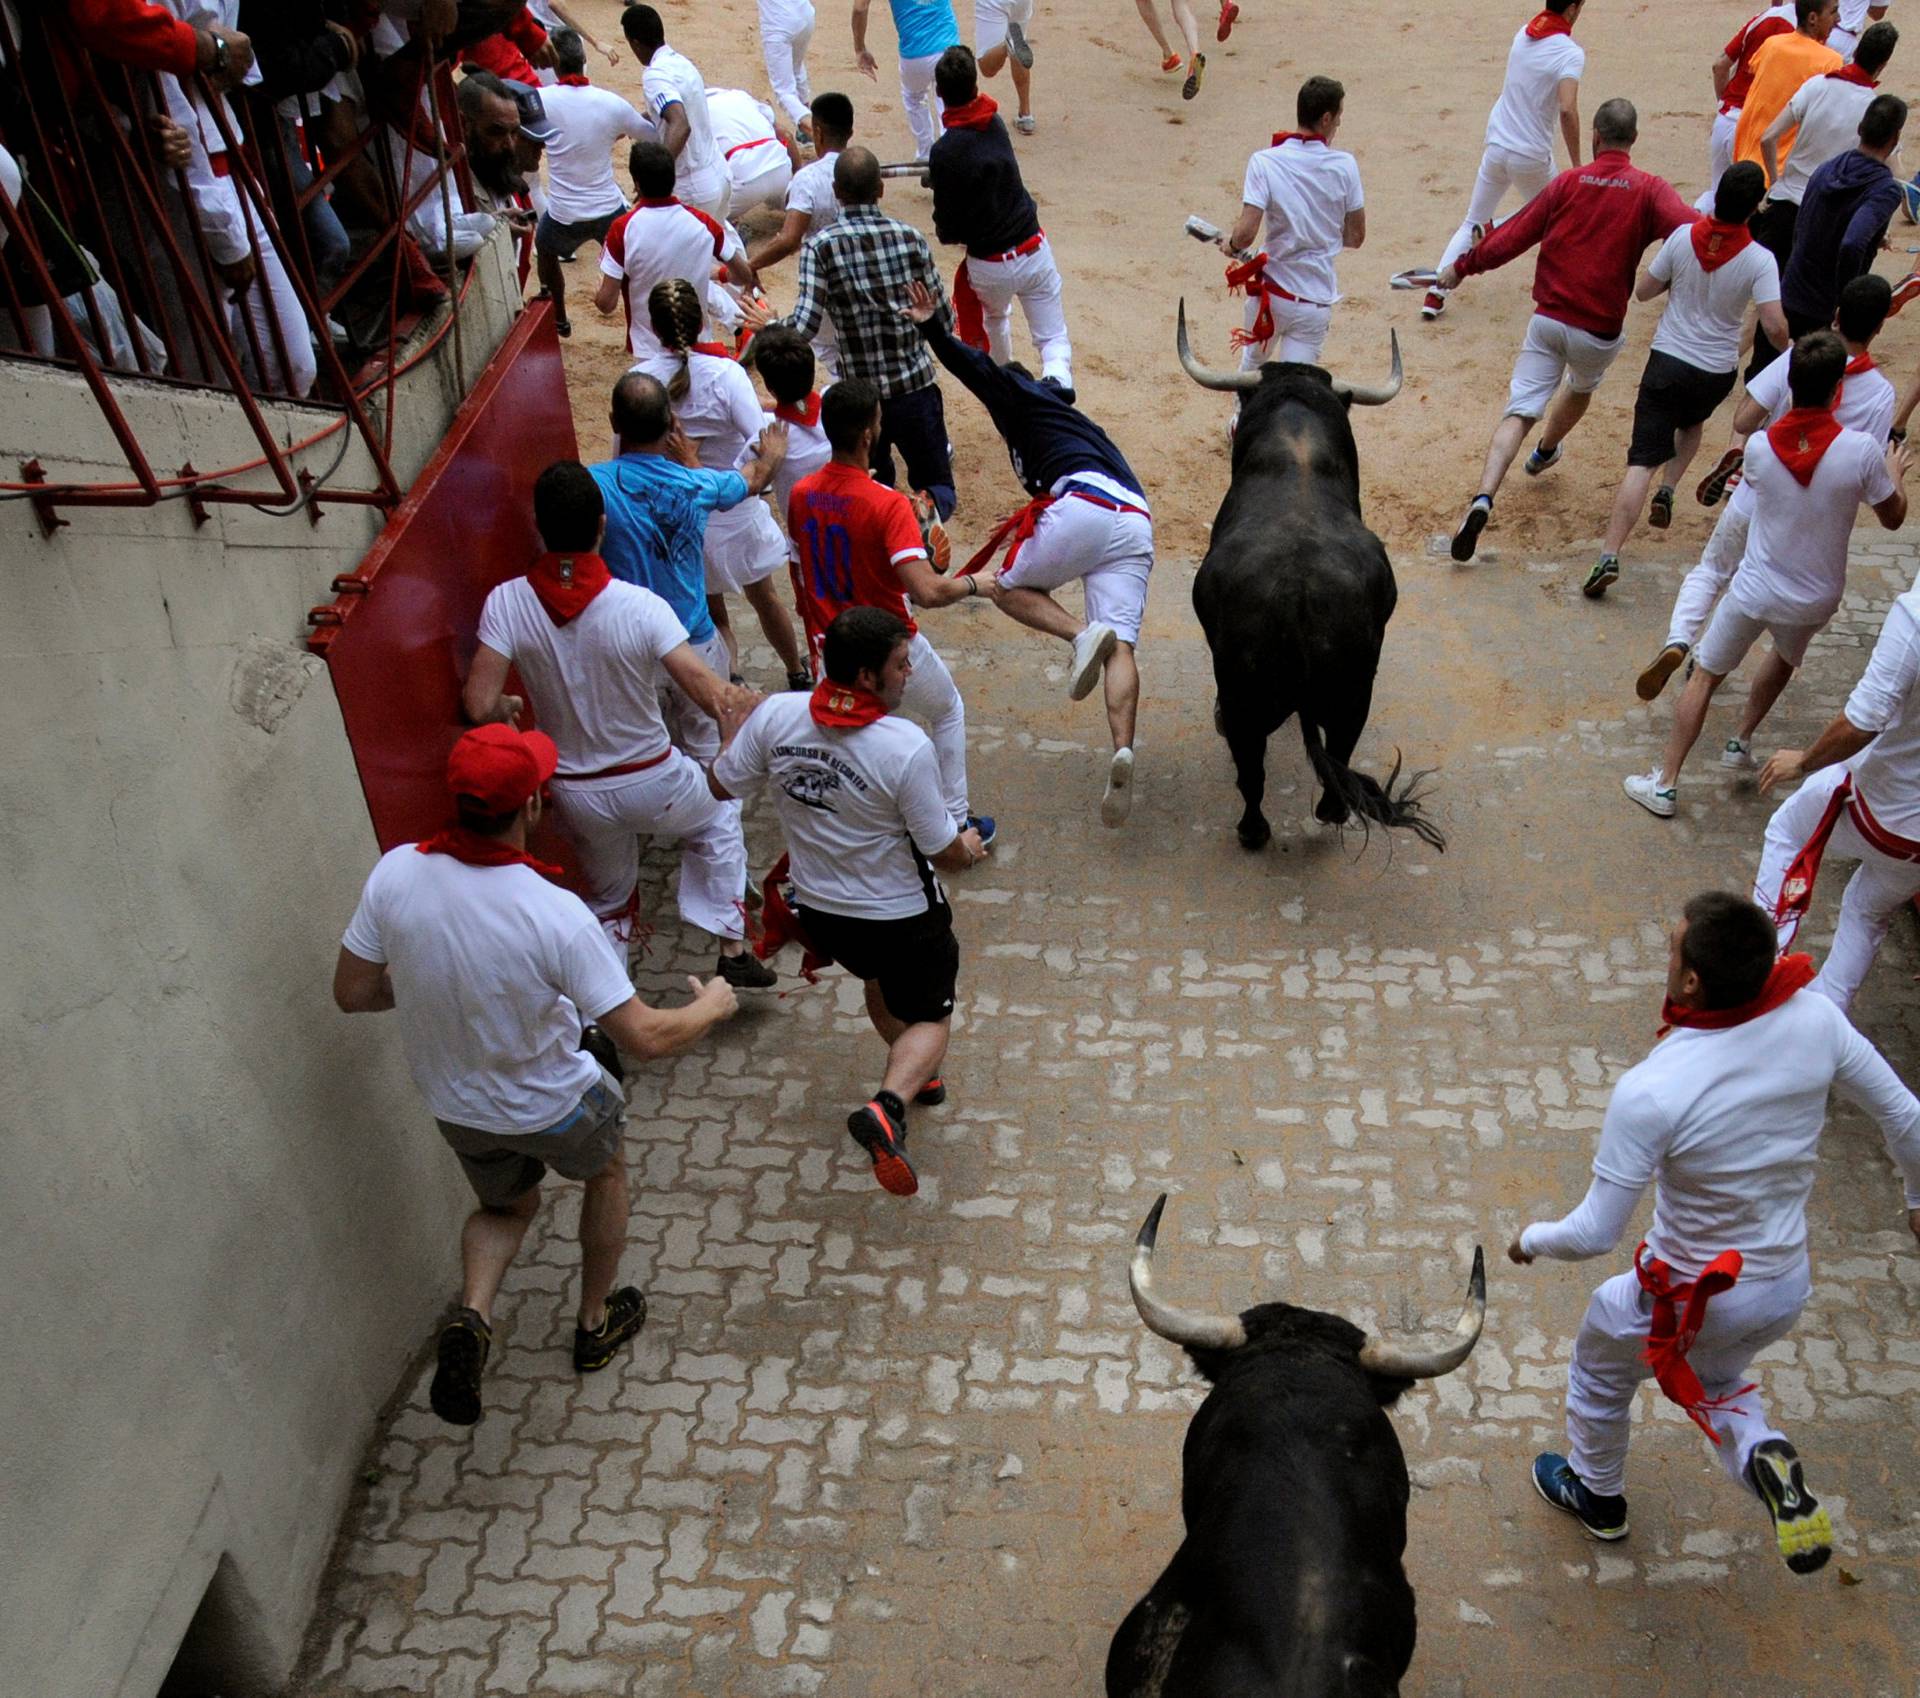 Runners sprint ahead of Fuente Ymbro fighting bulls during the fourth running of the bulls at the San Fermin festival in Pamplona